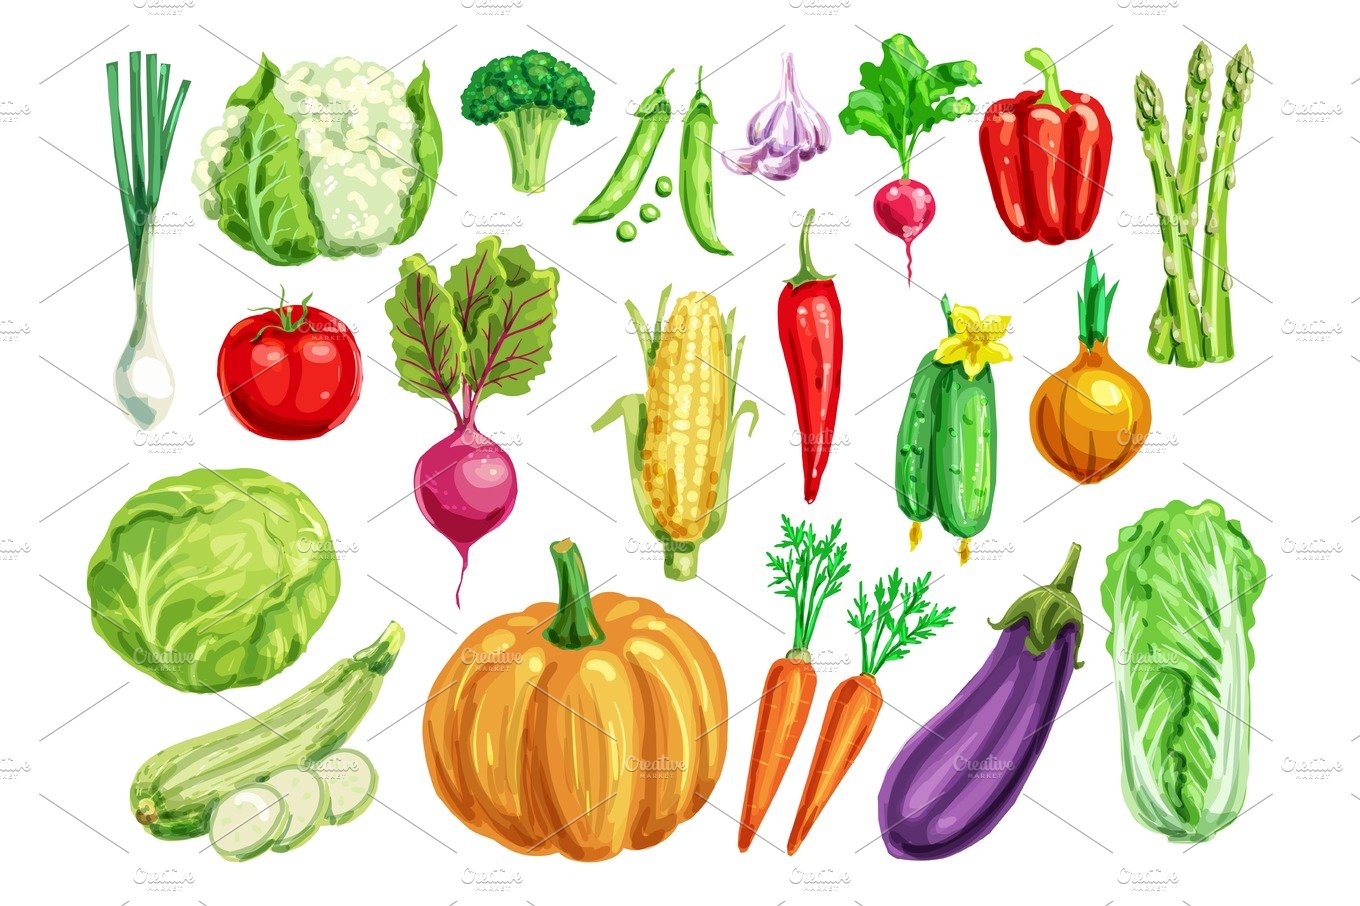 Vegetable watercolor set for healthy food design cover image.